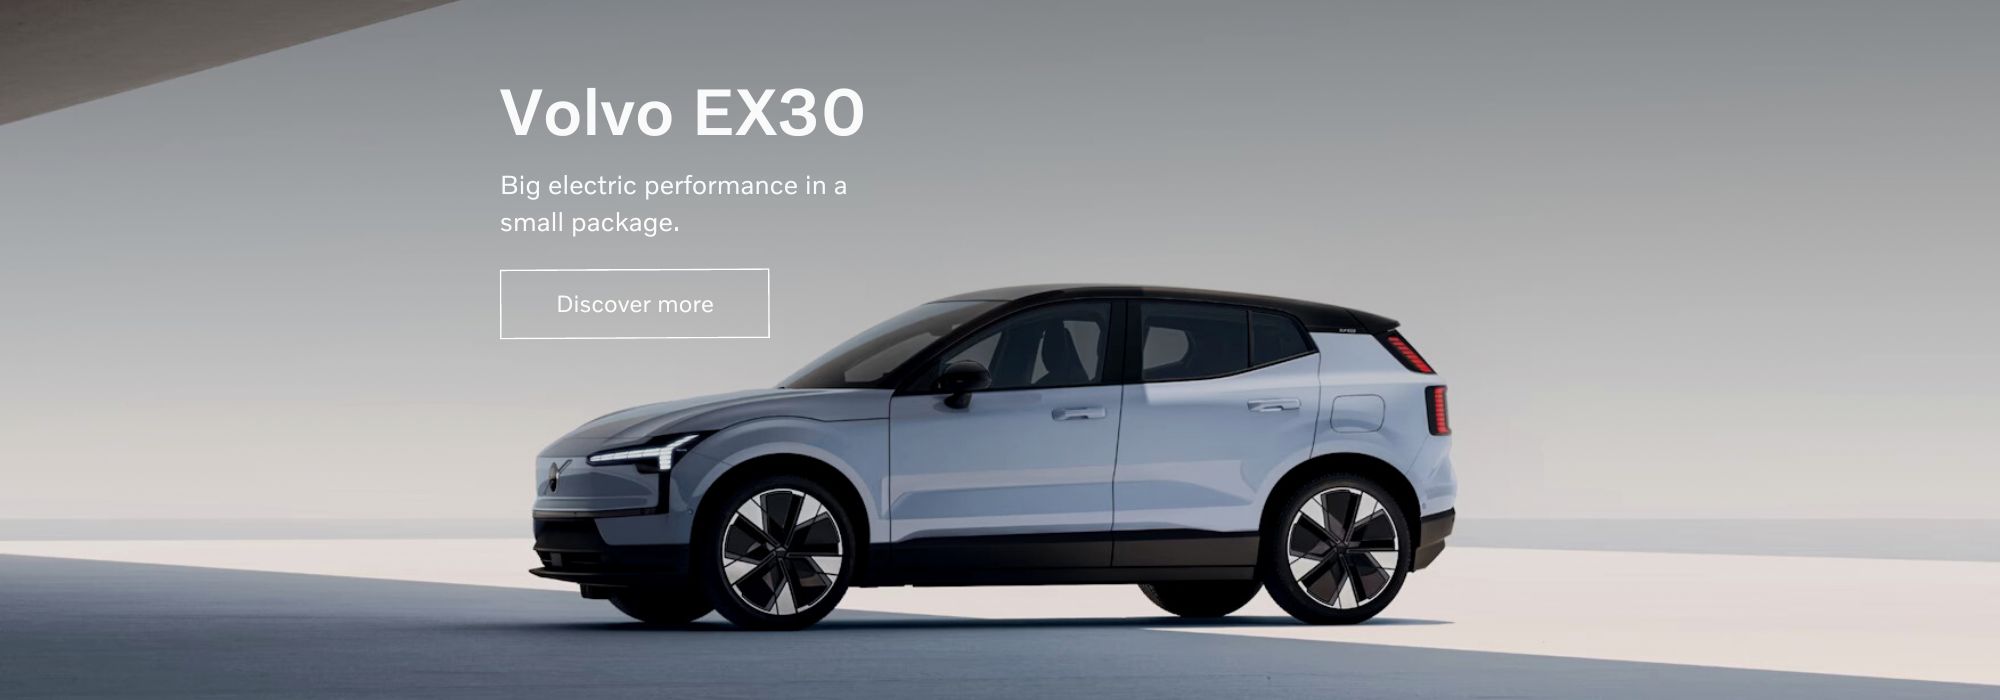 Volvo EX30 Big electric performance in a small package.